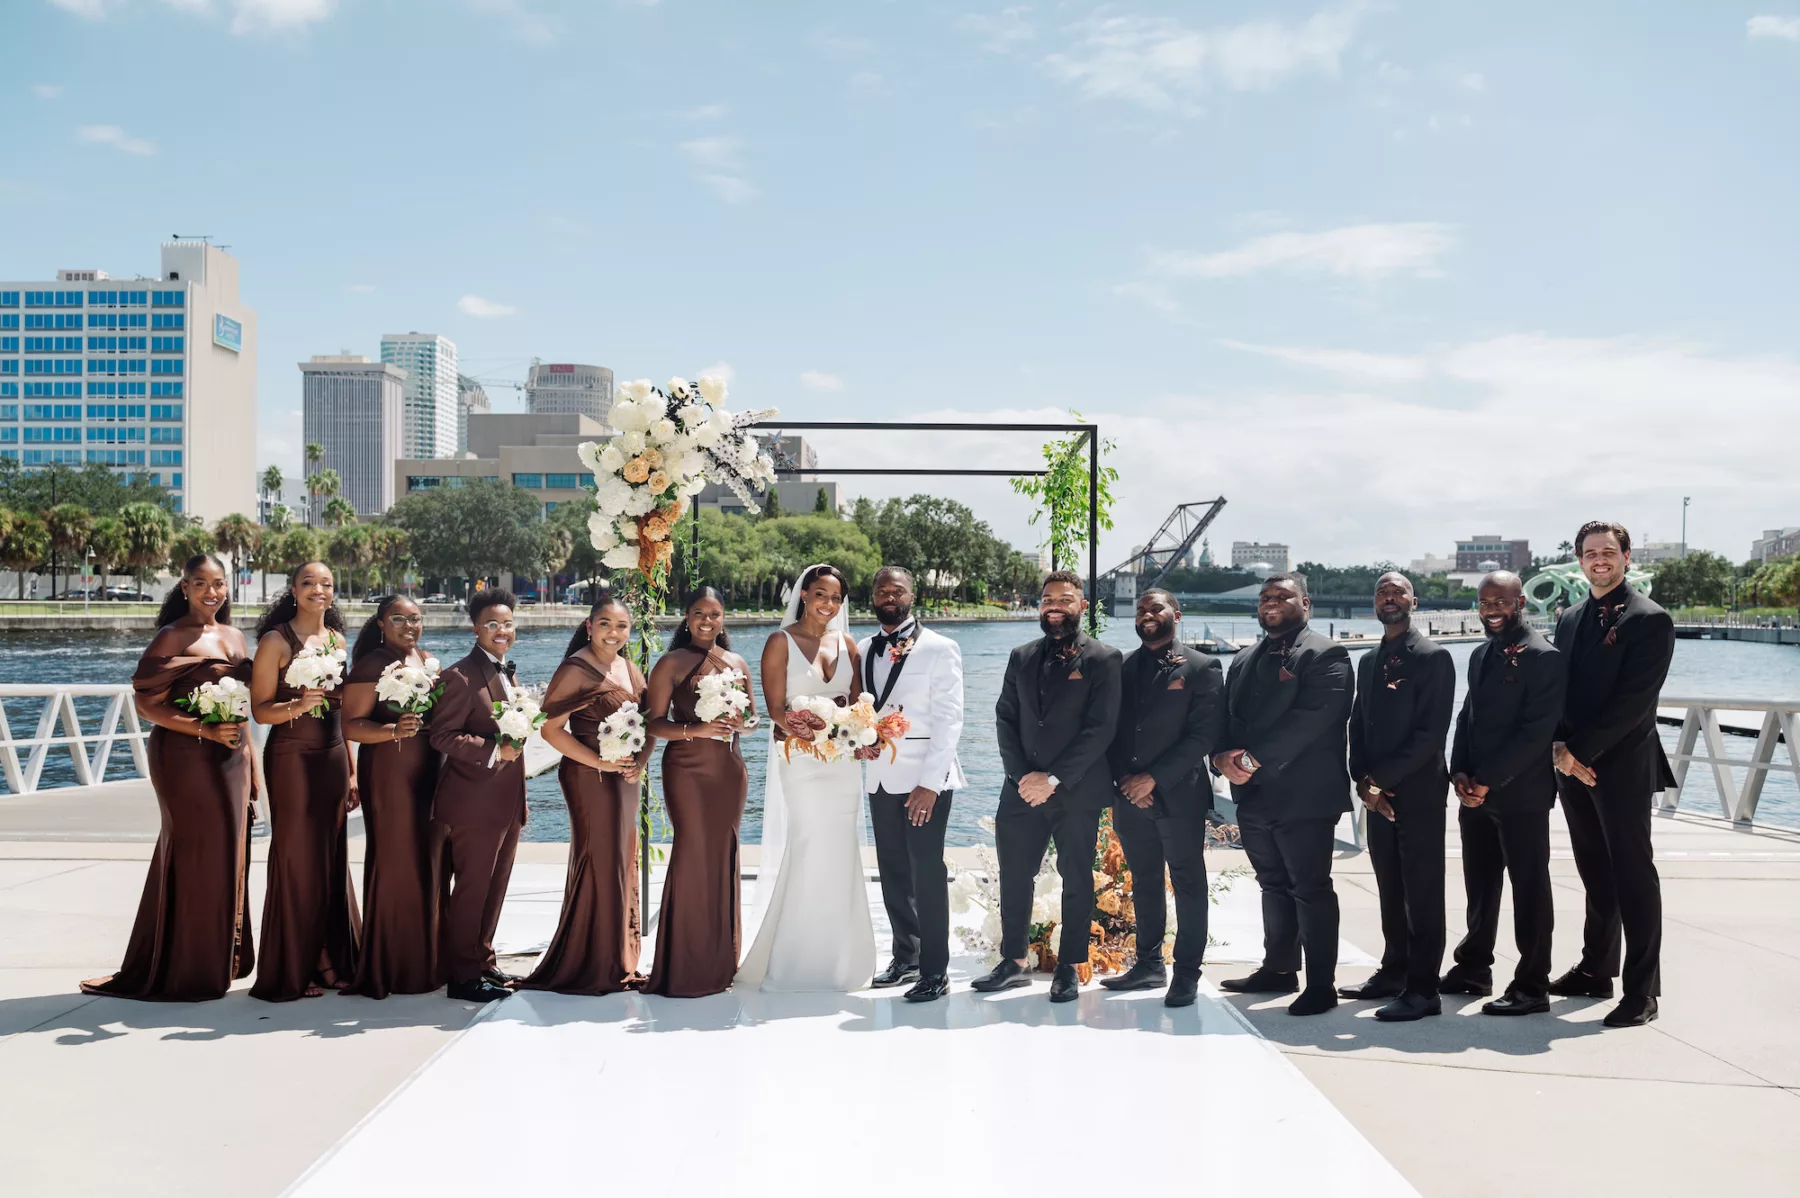 Black and Bronze Fall Wedding Party Dress and Suit Attire Ideas